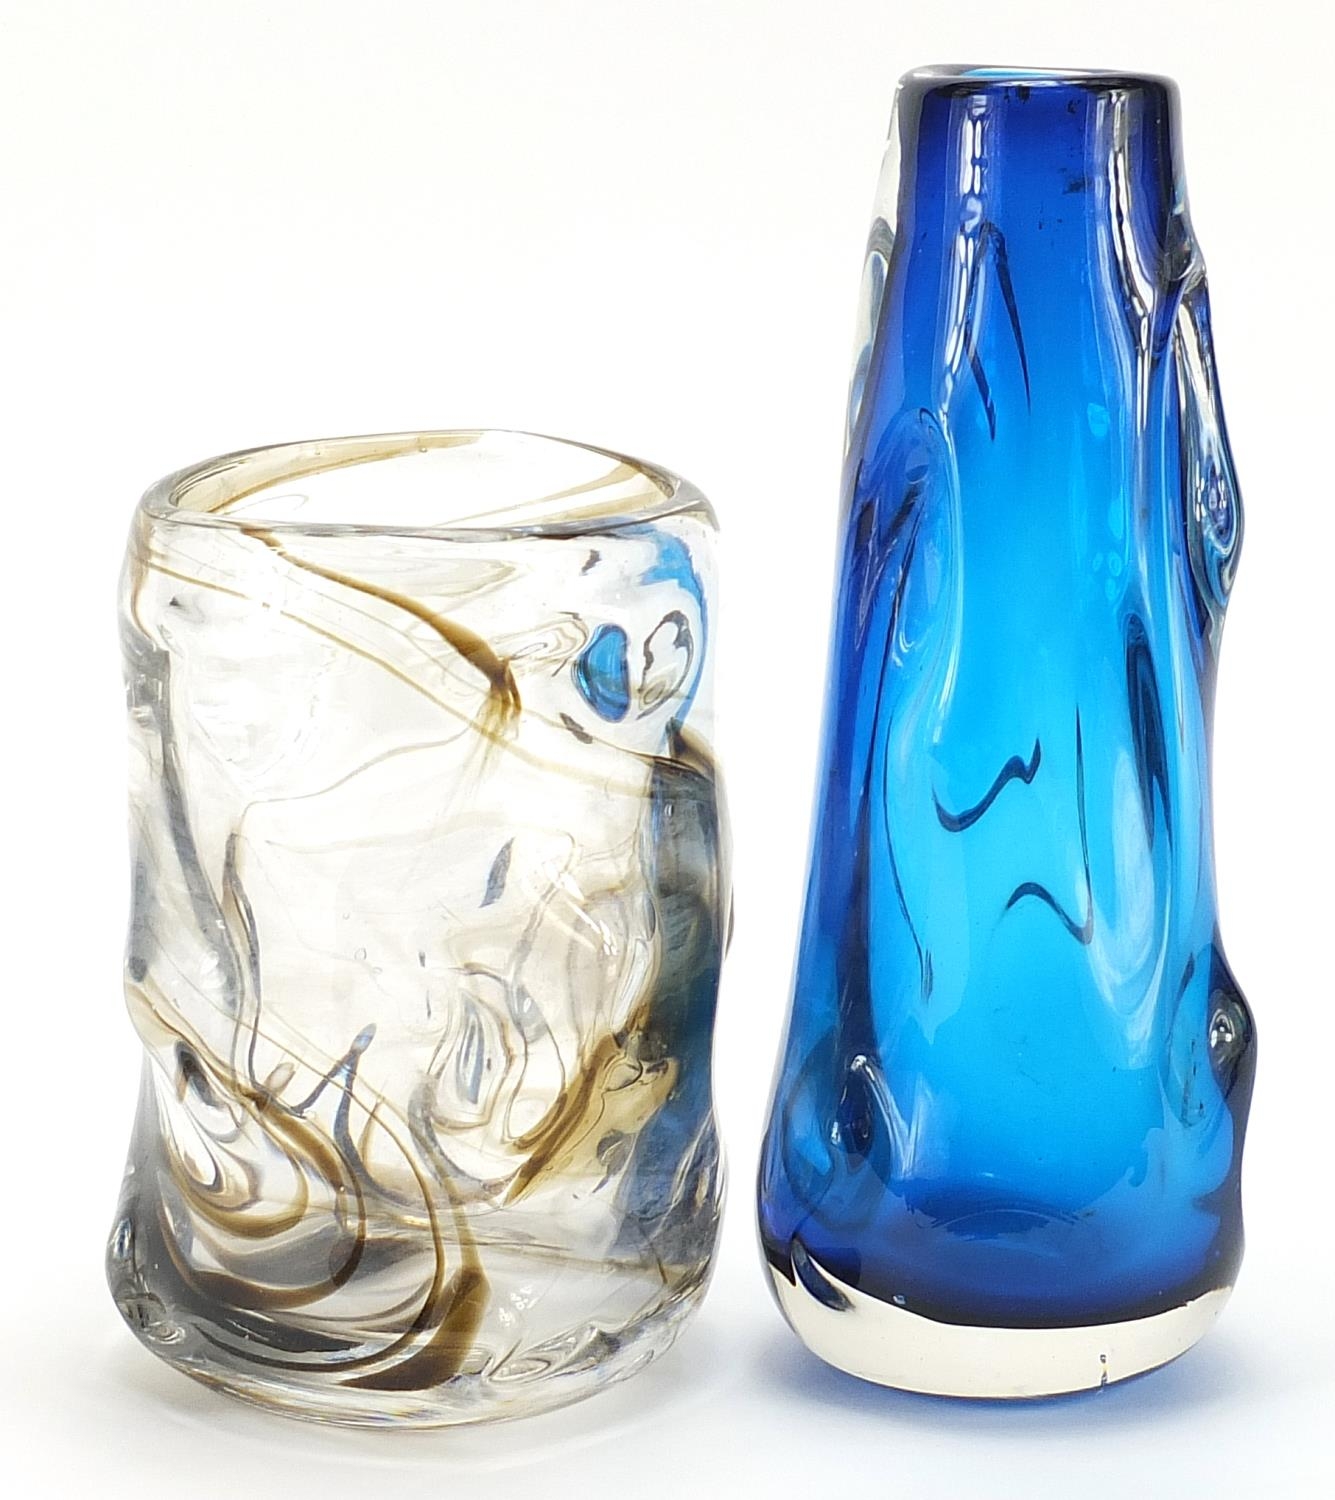 Two Whitefriars knobbly glass vases, the largest 24.5cm high